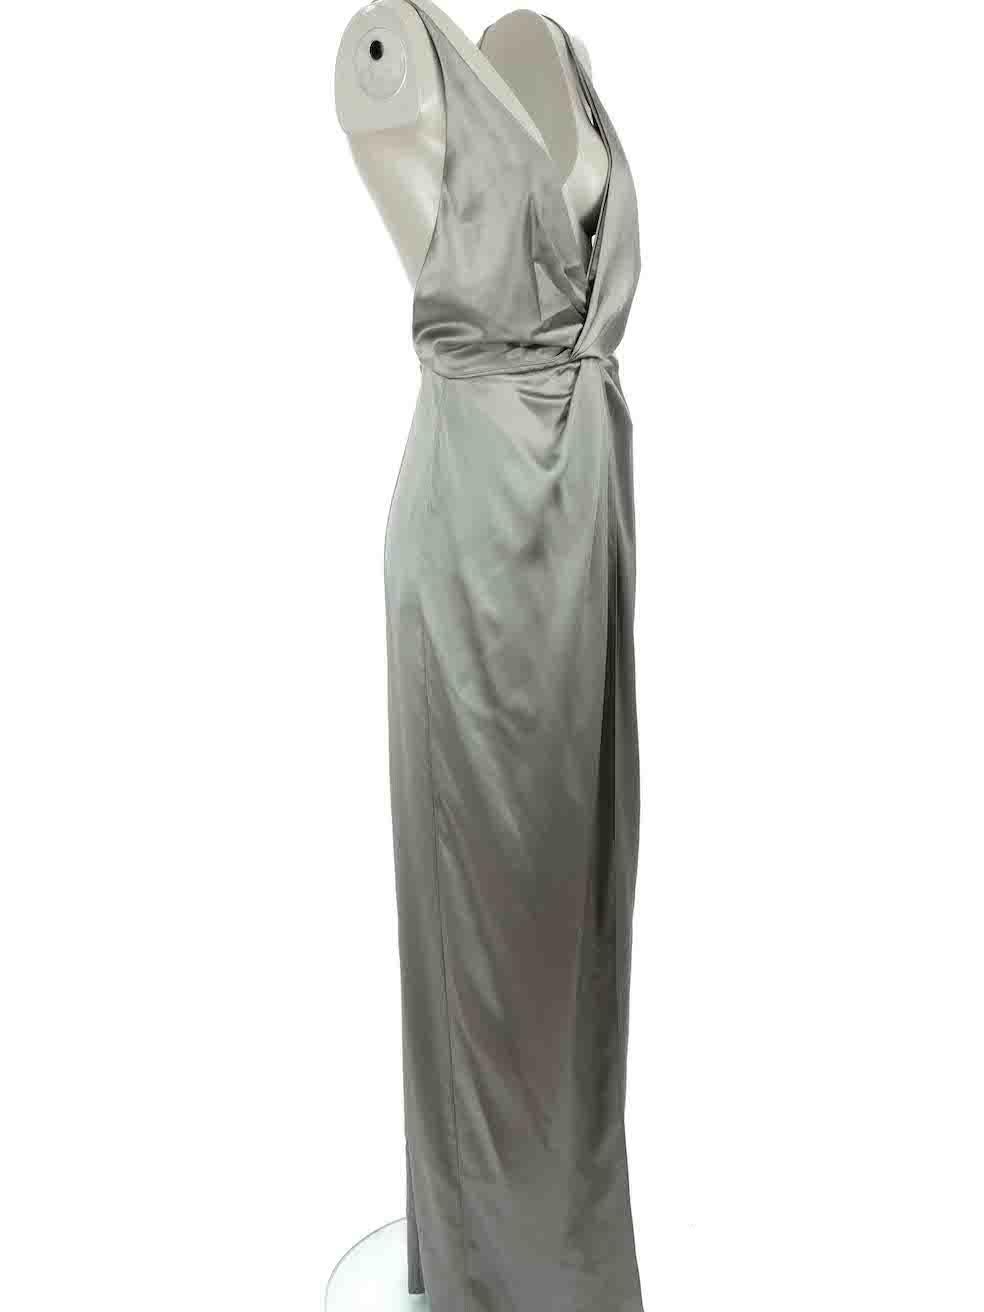 CONDITION is Very good. Hardly any visible wear to dress is evident on this used Gucci designer resale item.
 
Details
Vintage
Grey
Silk
Gown
Sleeveless
V-neck
Maxi
Leg slit opening
Back zip and hook fastening
 
Made in Italy
 
Composition
100%